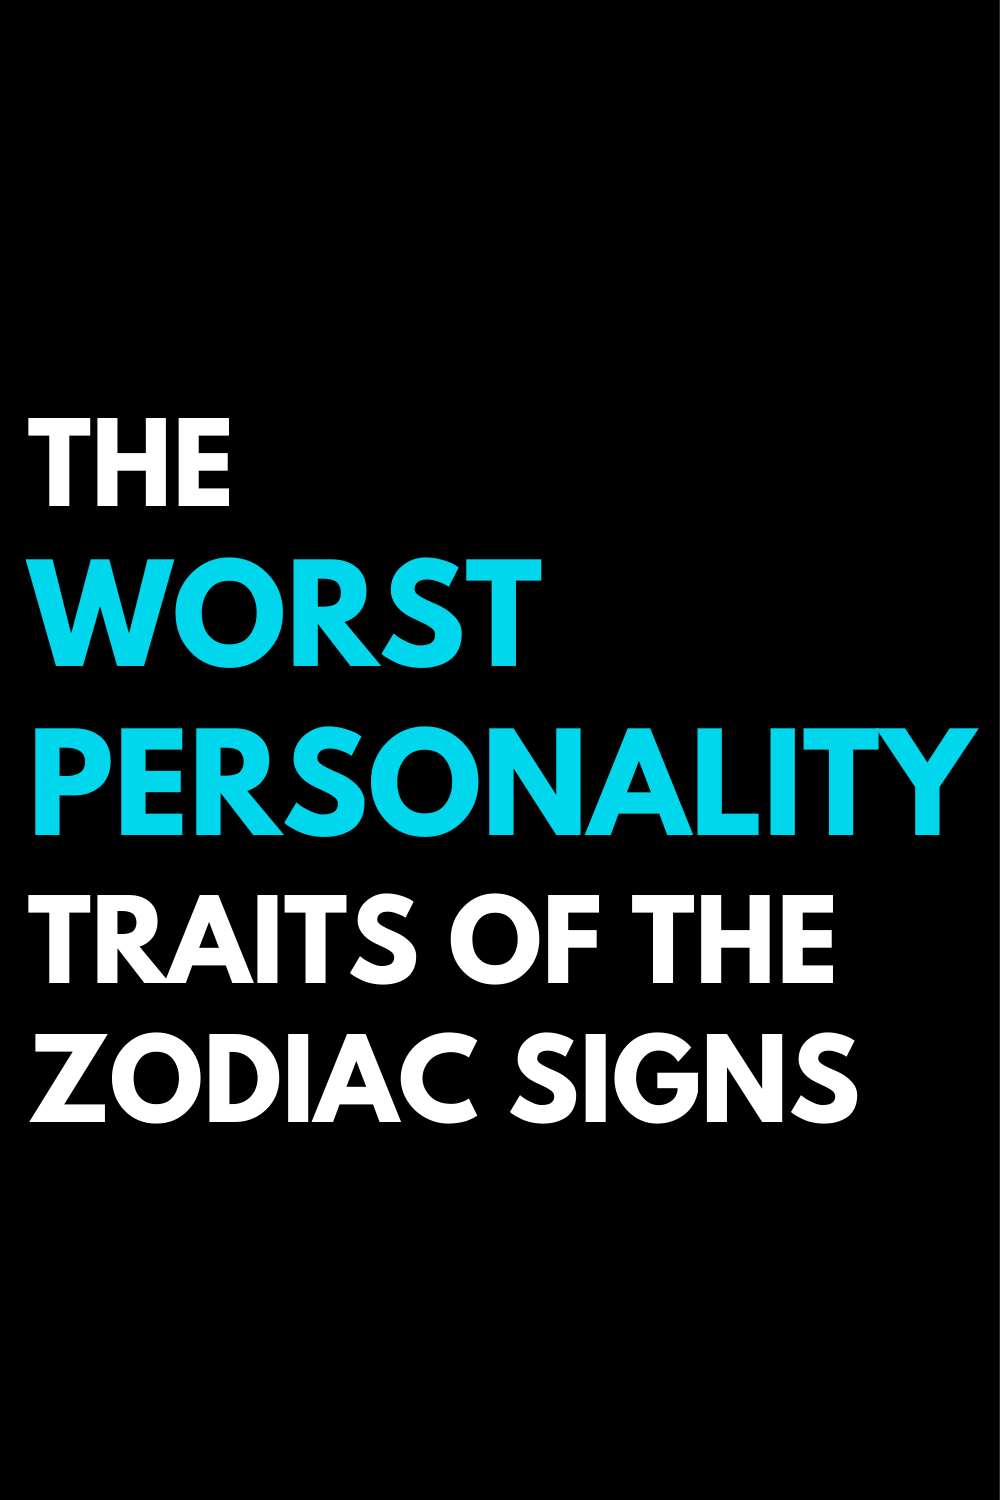 The worst personality traits of the zodiac signs